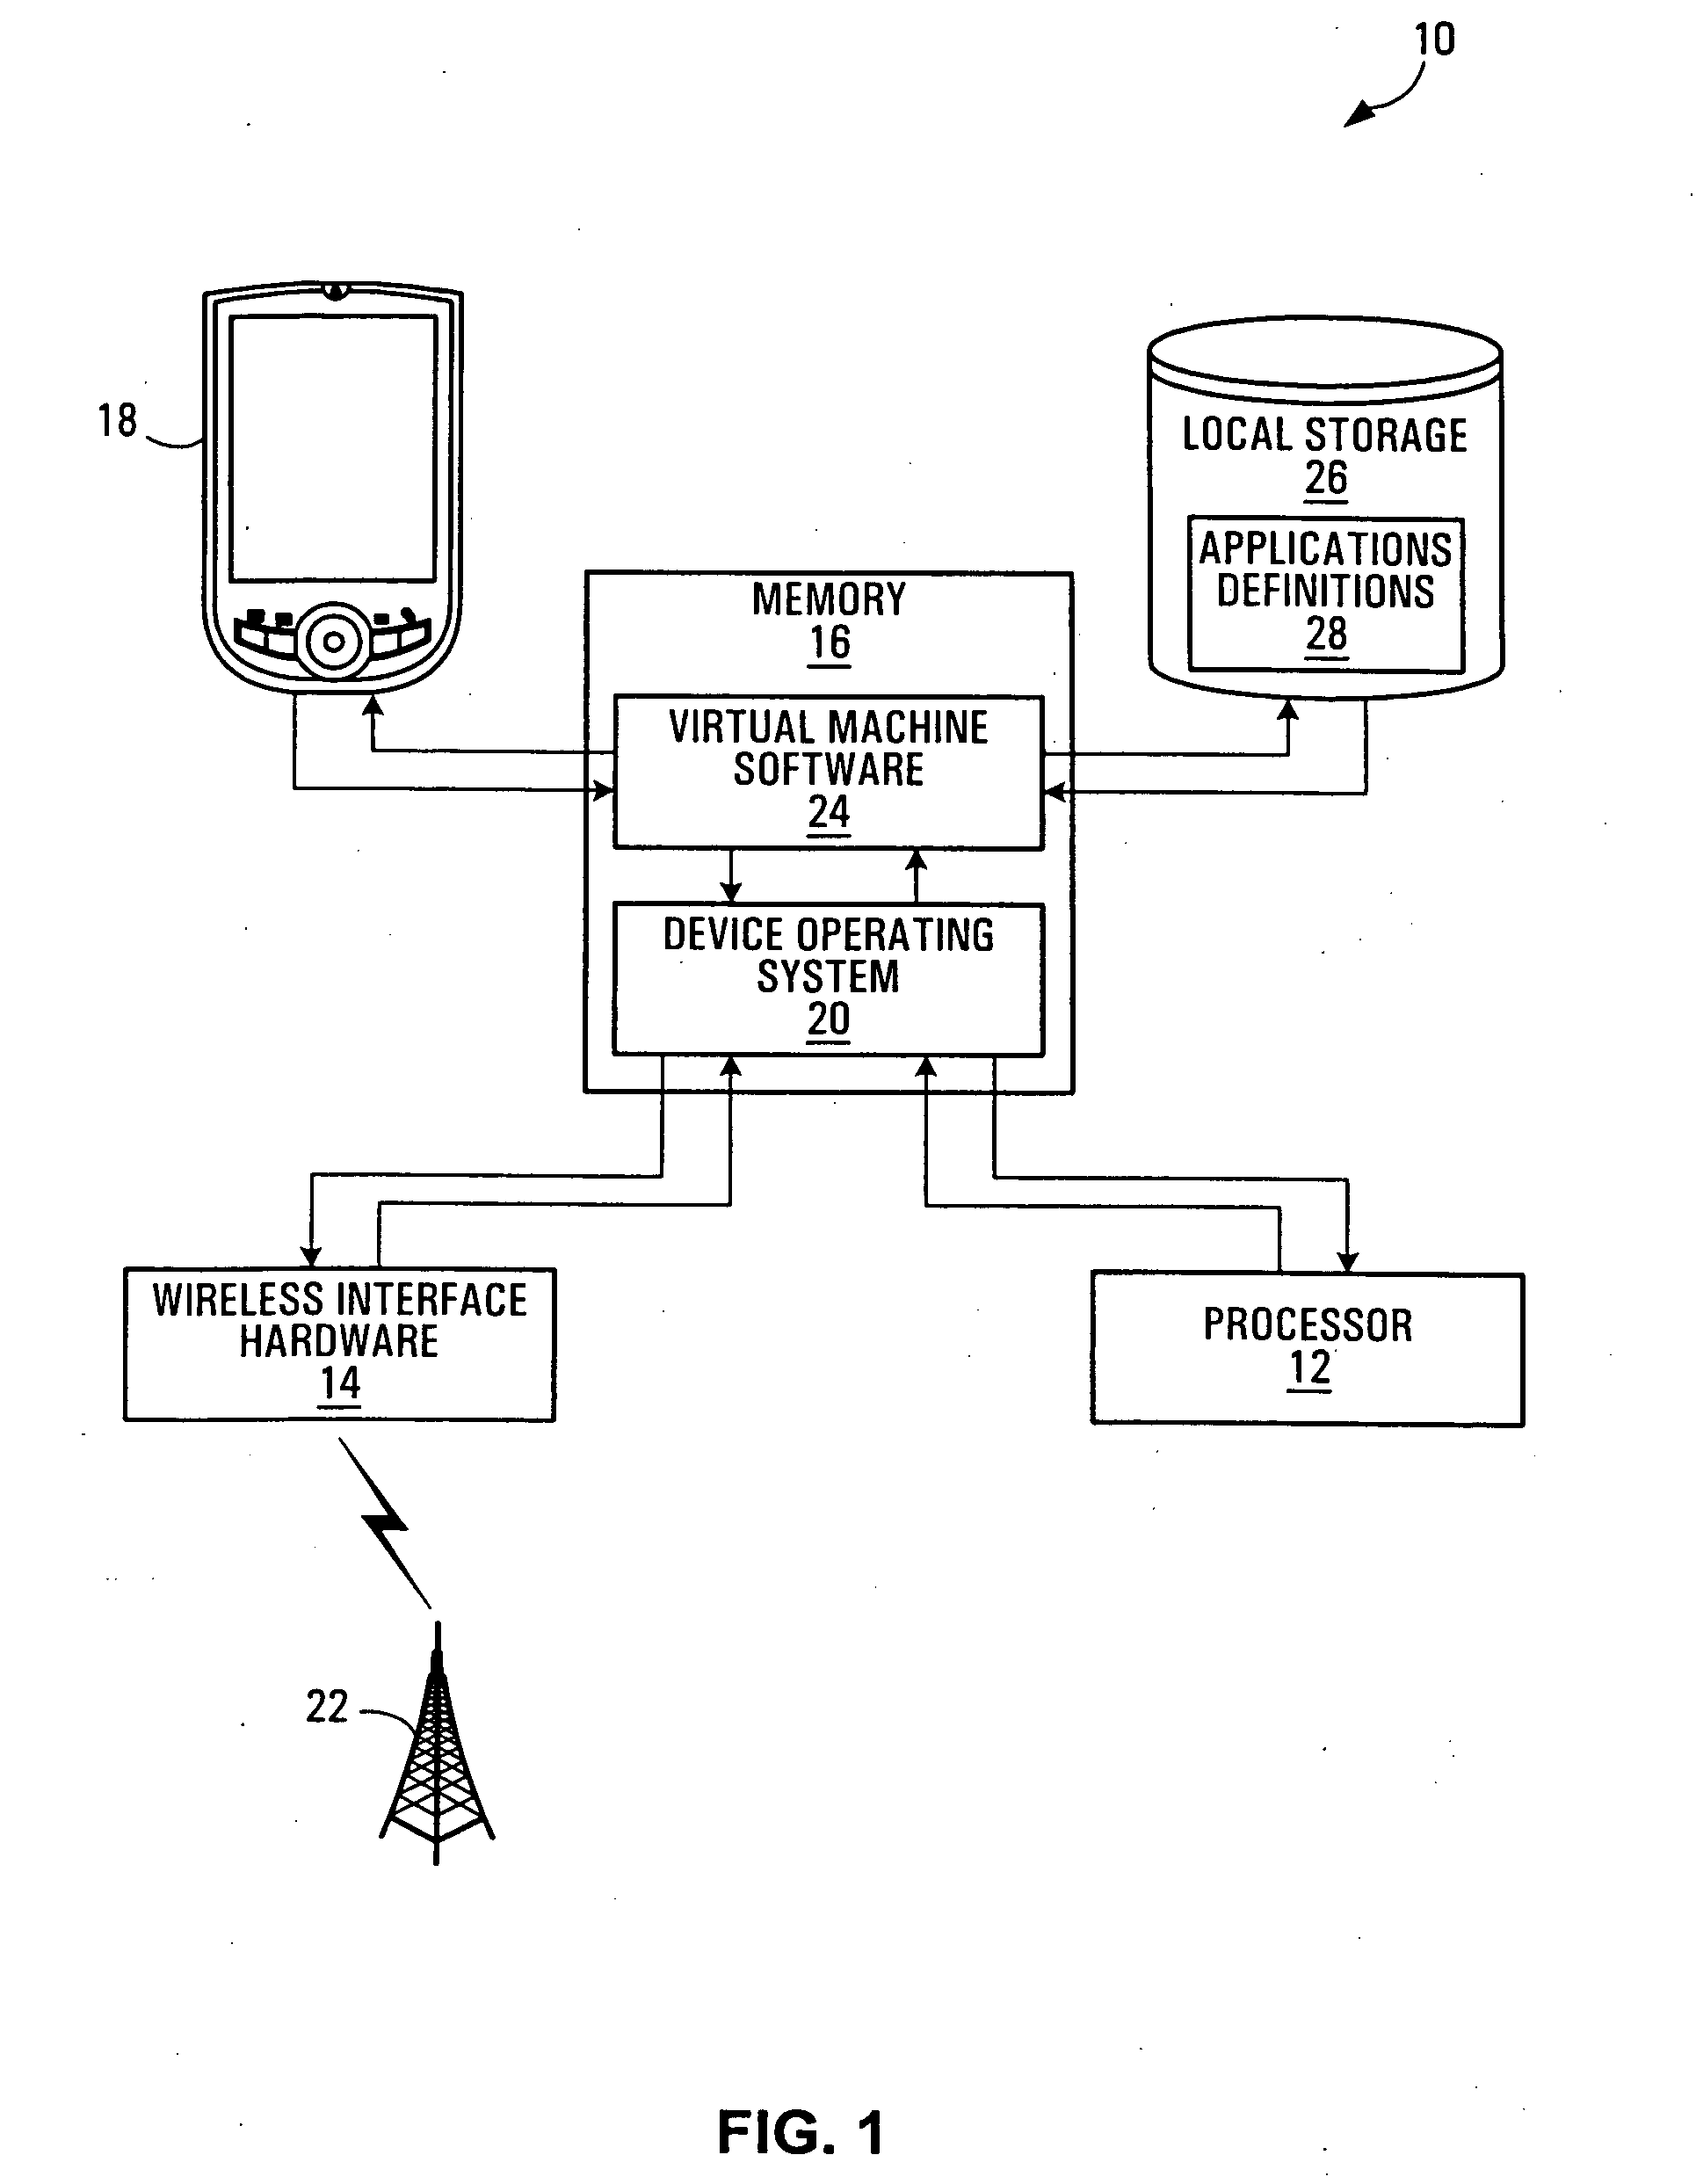 Mobile device having extensible sofware for presenting server-side applications, software and methods